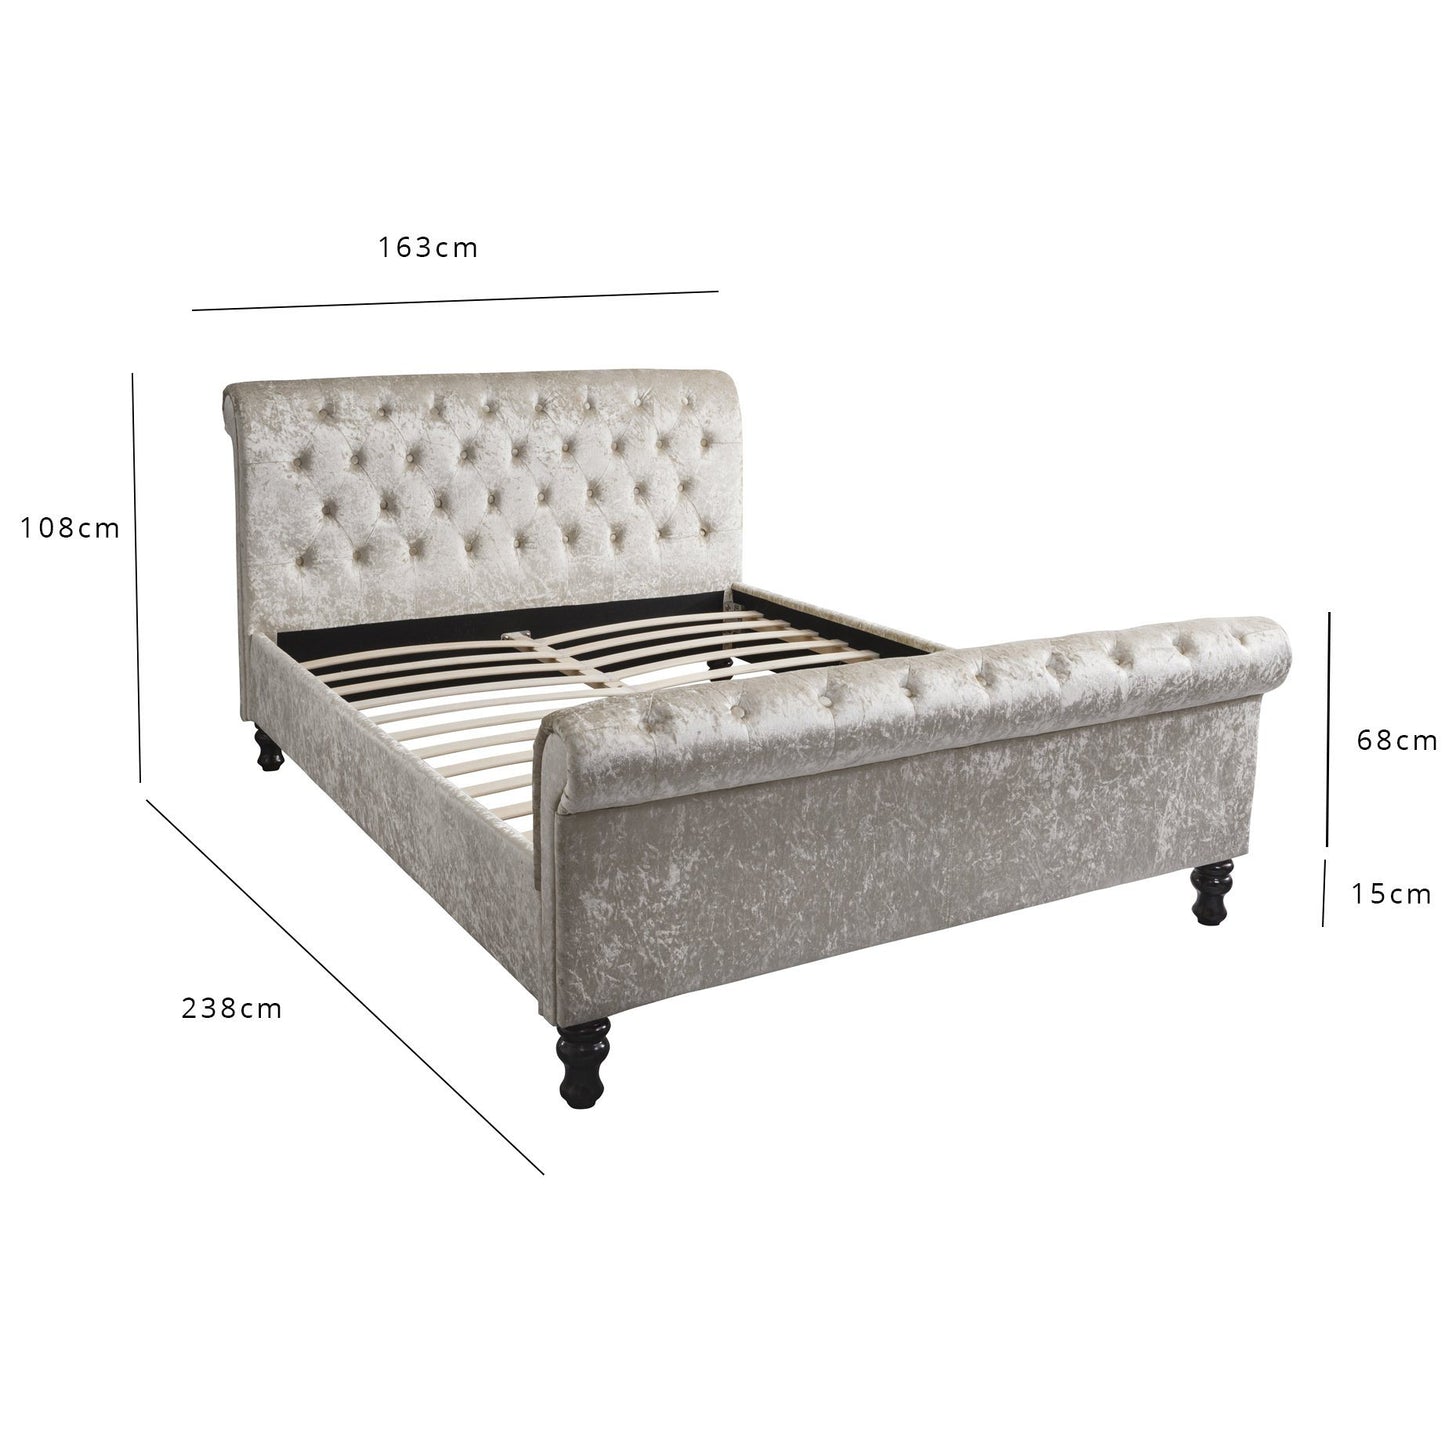 King Size Crushed Velvet Sleigh Bed Frame and Mattress Set - Champagne